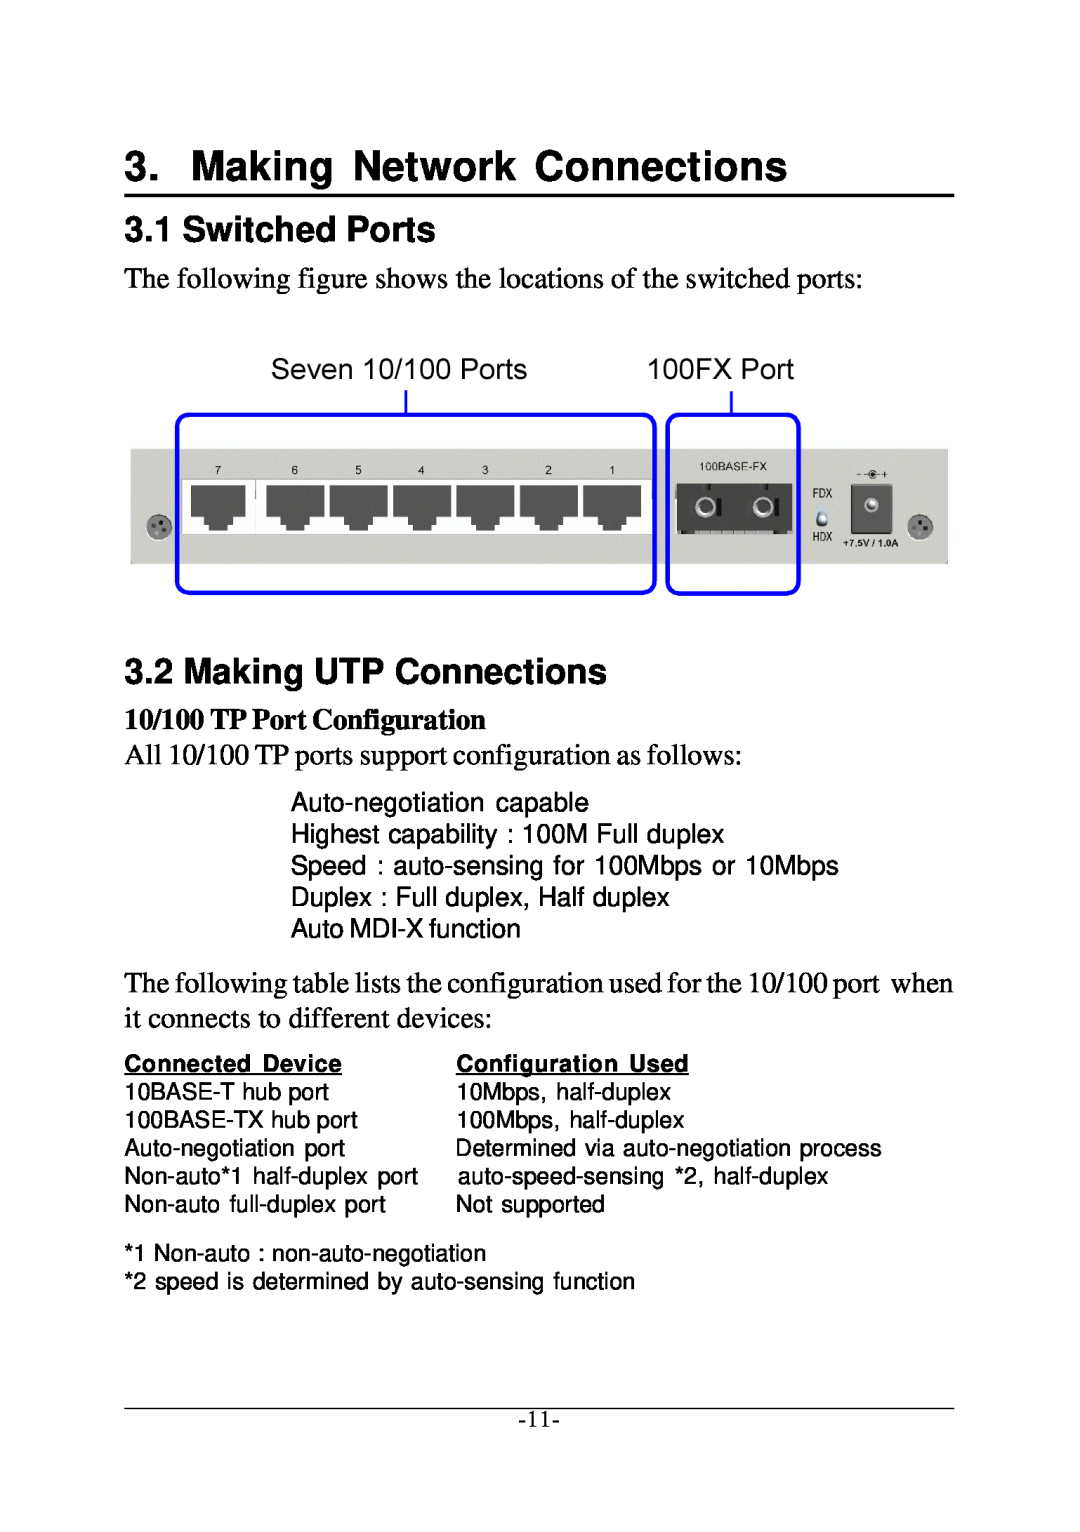 KTI Networks KS-108F manual Making Network Connections, Switched Ports, Making UTP Connections 